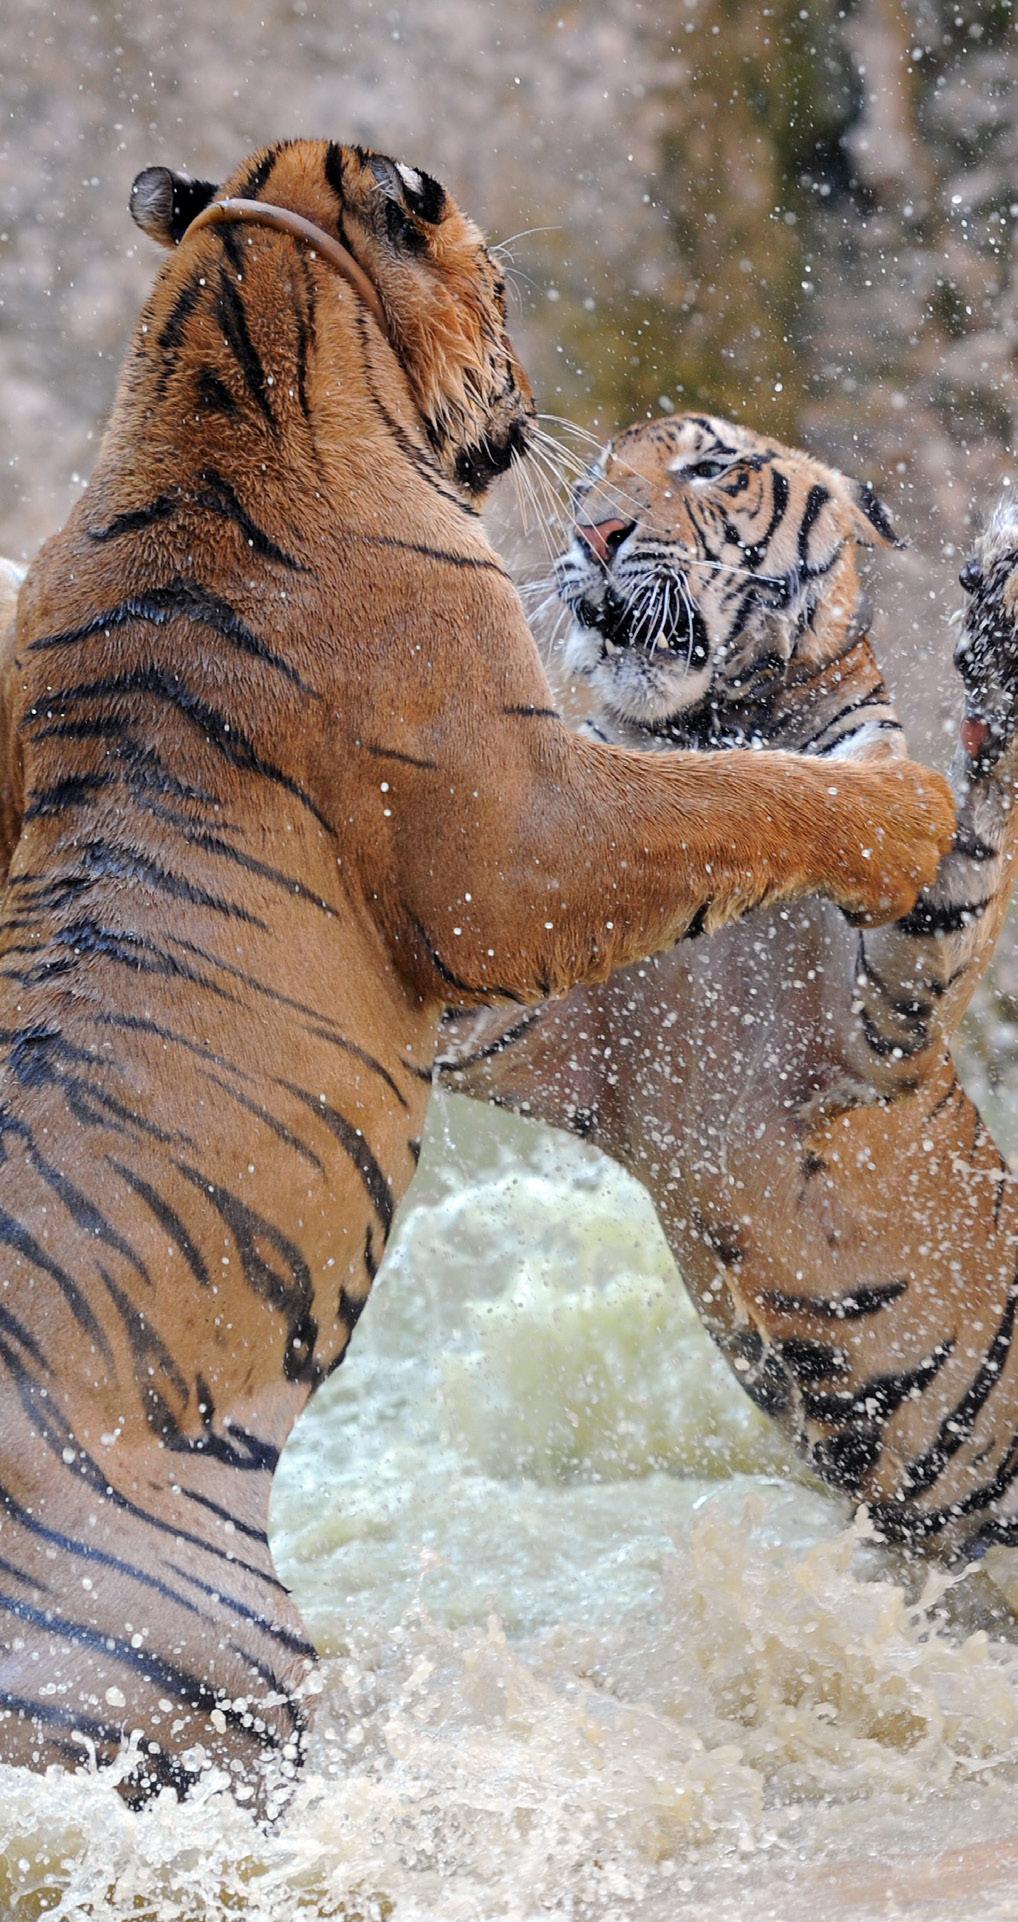 Often, older animals from the Temple were exchanged for young cubs from Laos. The old tigers were then sold and killed for their body parts, e.g. to make medicine from tiger bone glue.